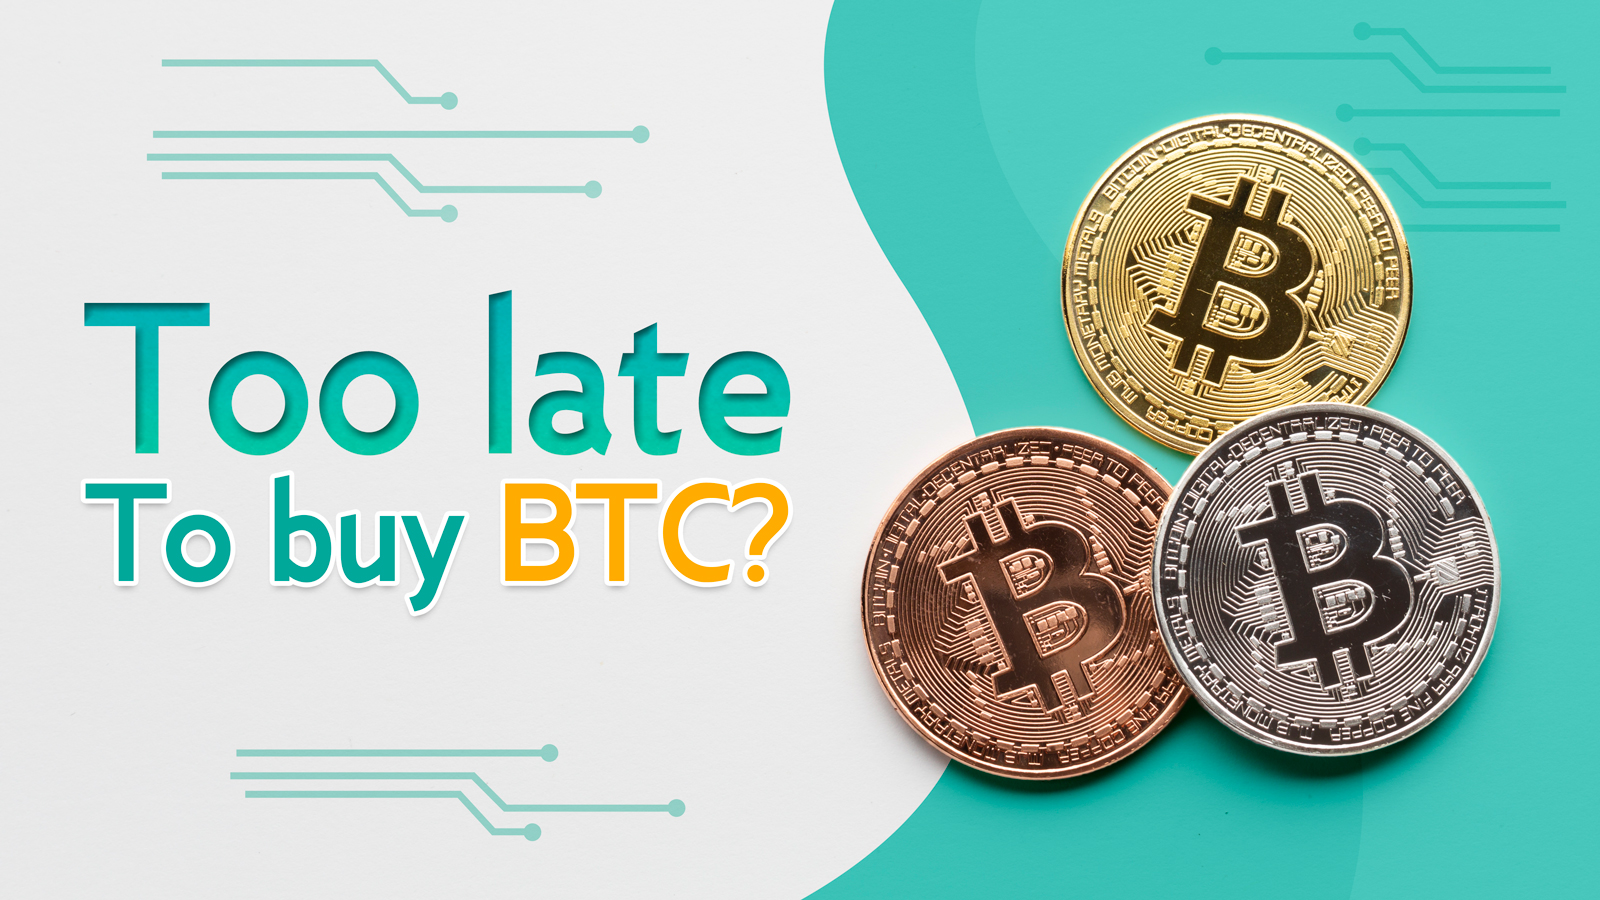 When will it be too late to invest in Bitcoin?